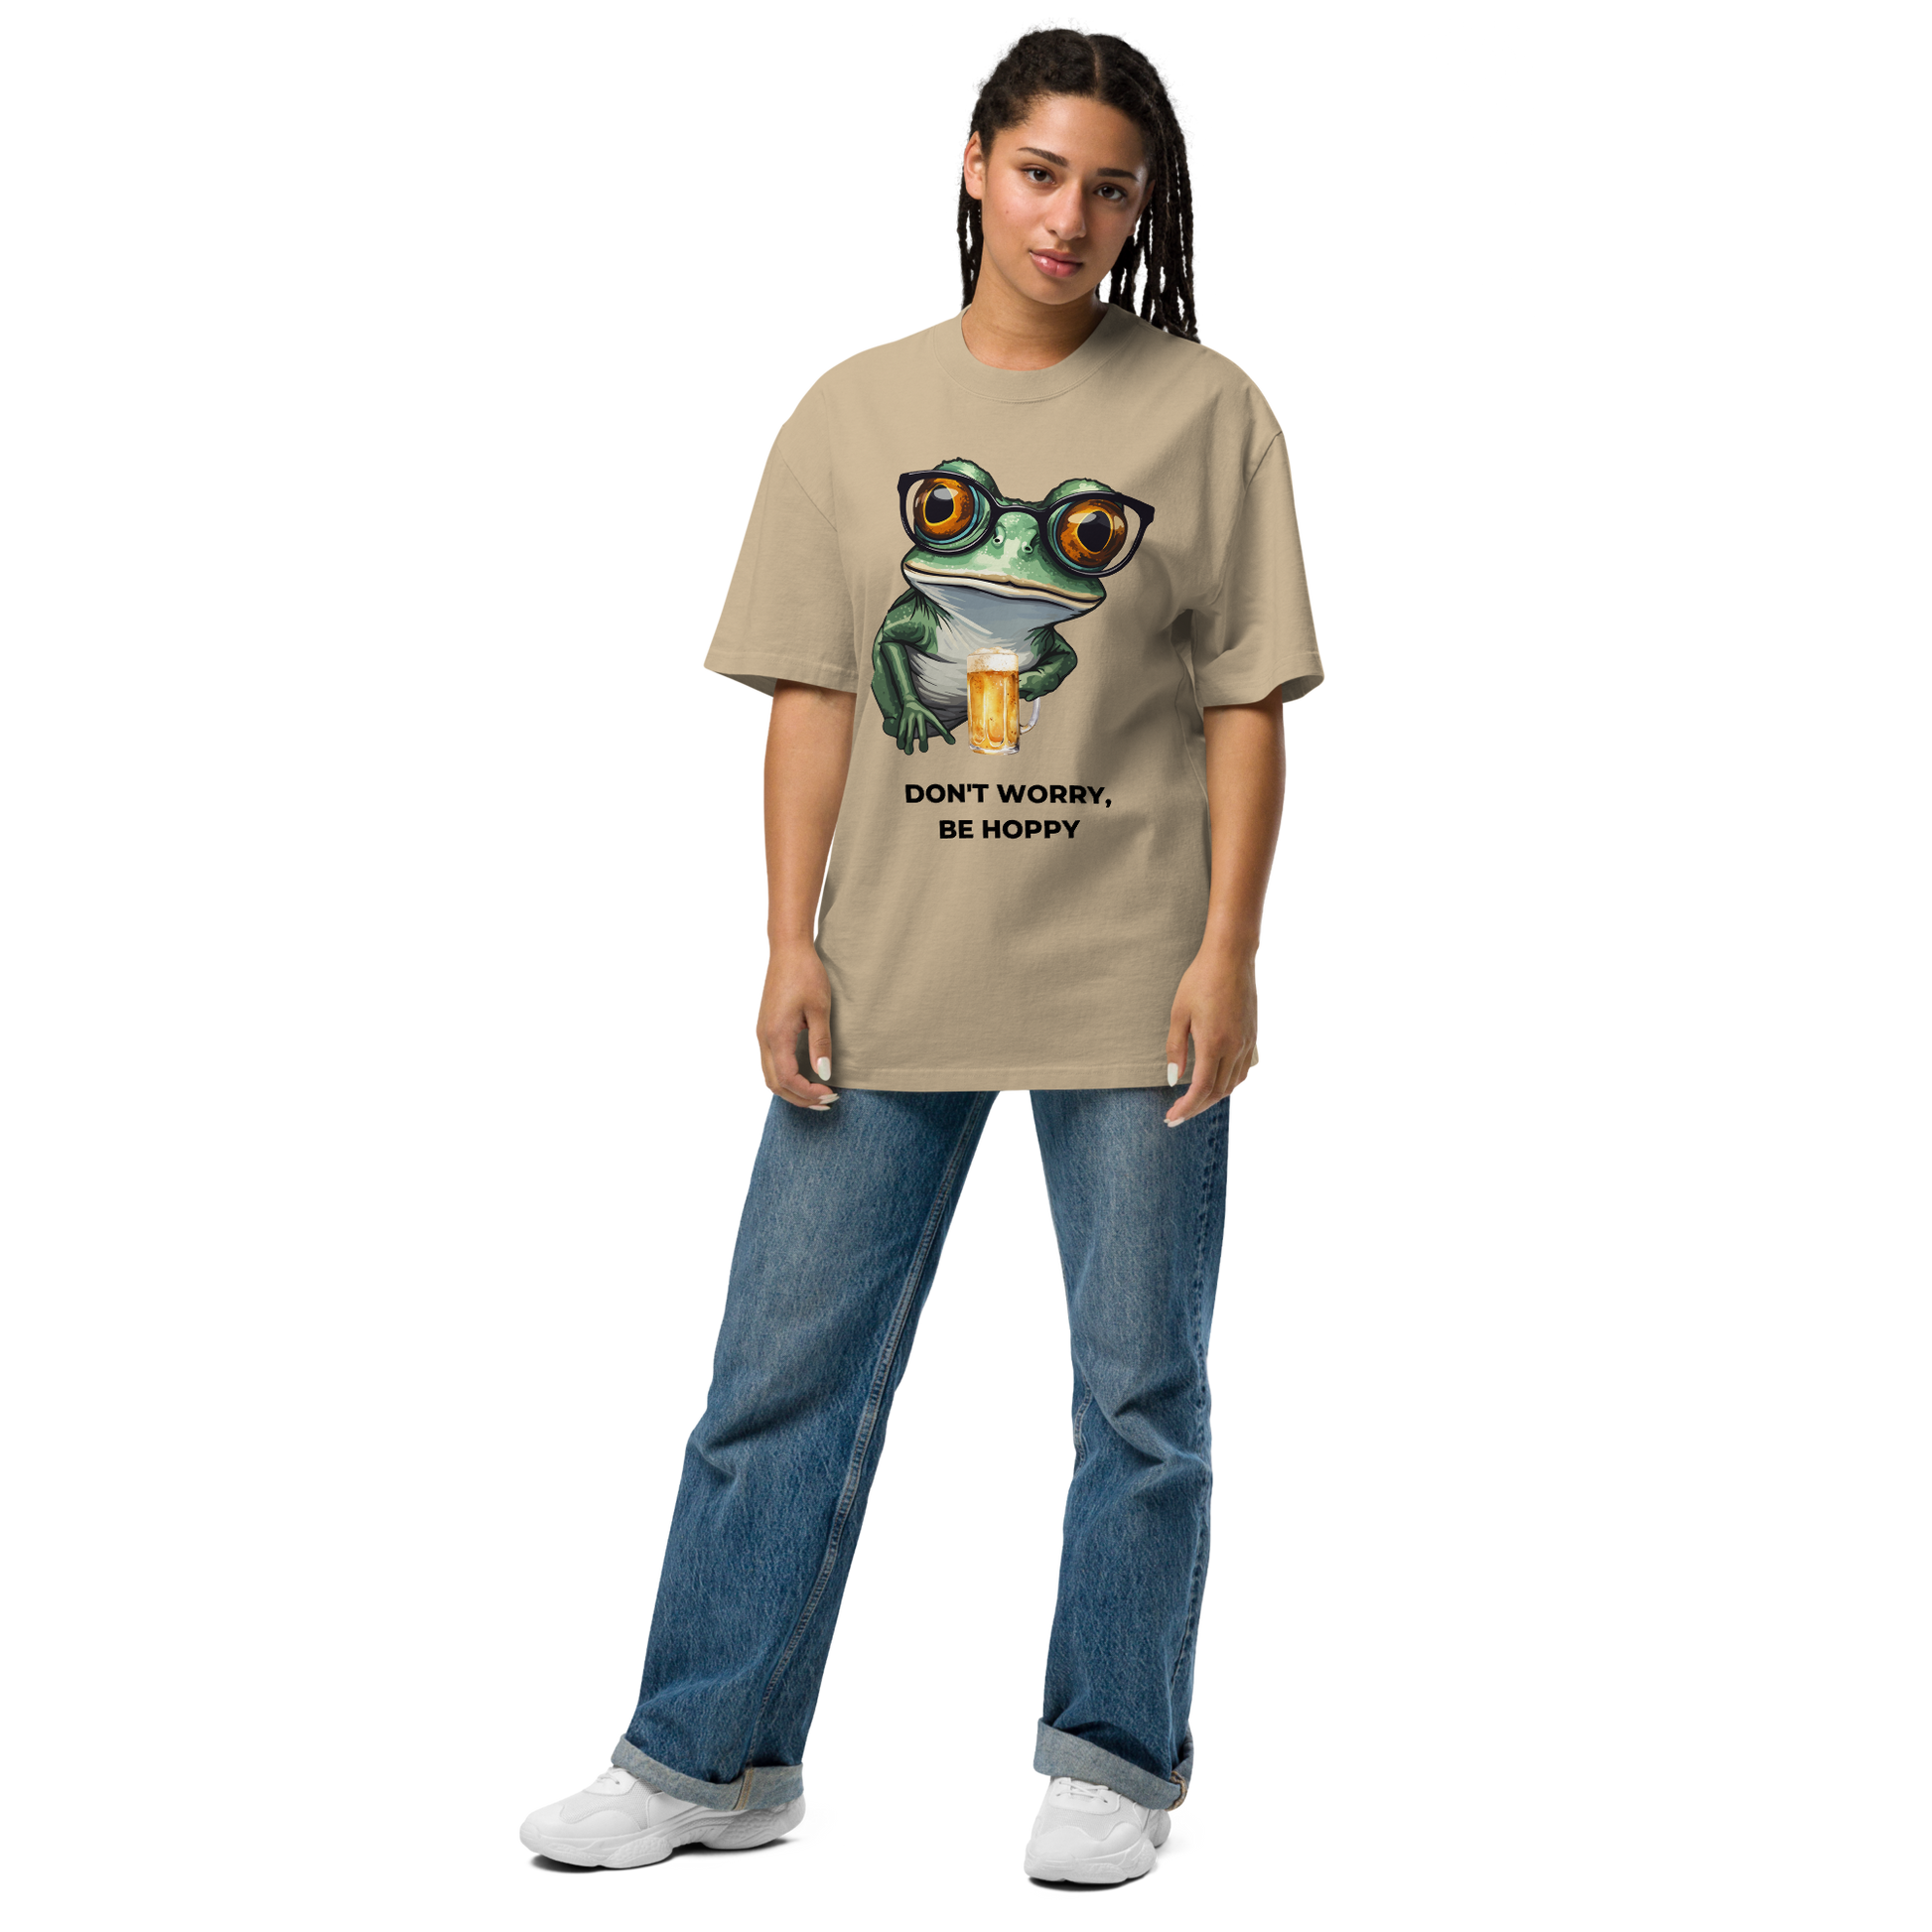 Woman wearing a Faded Khaki Frog Oversized T-Shirt featuring a ribbitting Don't Worry, Be Hoppy graphic on the chest - Funny Graphic Frog Oversized Tees - Boozy Fox